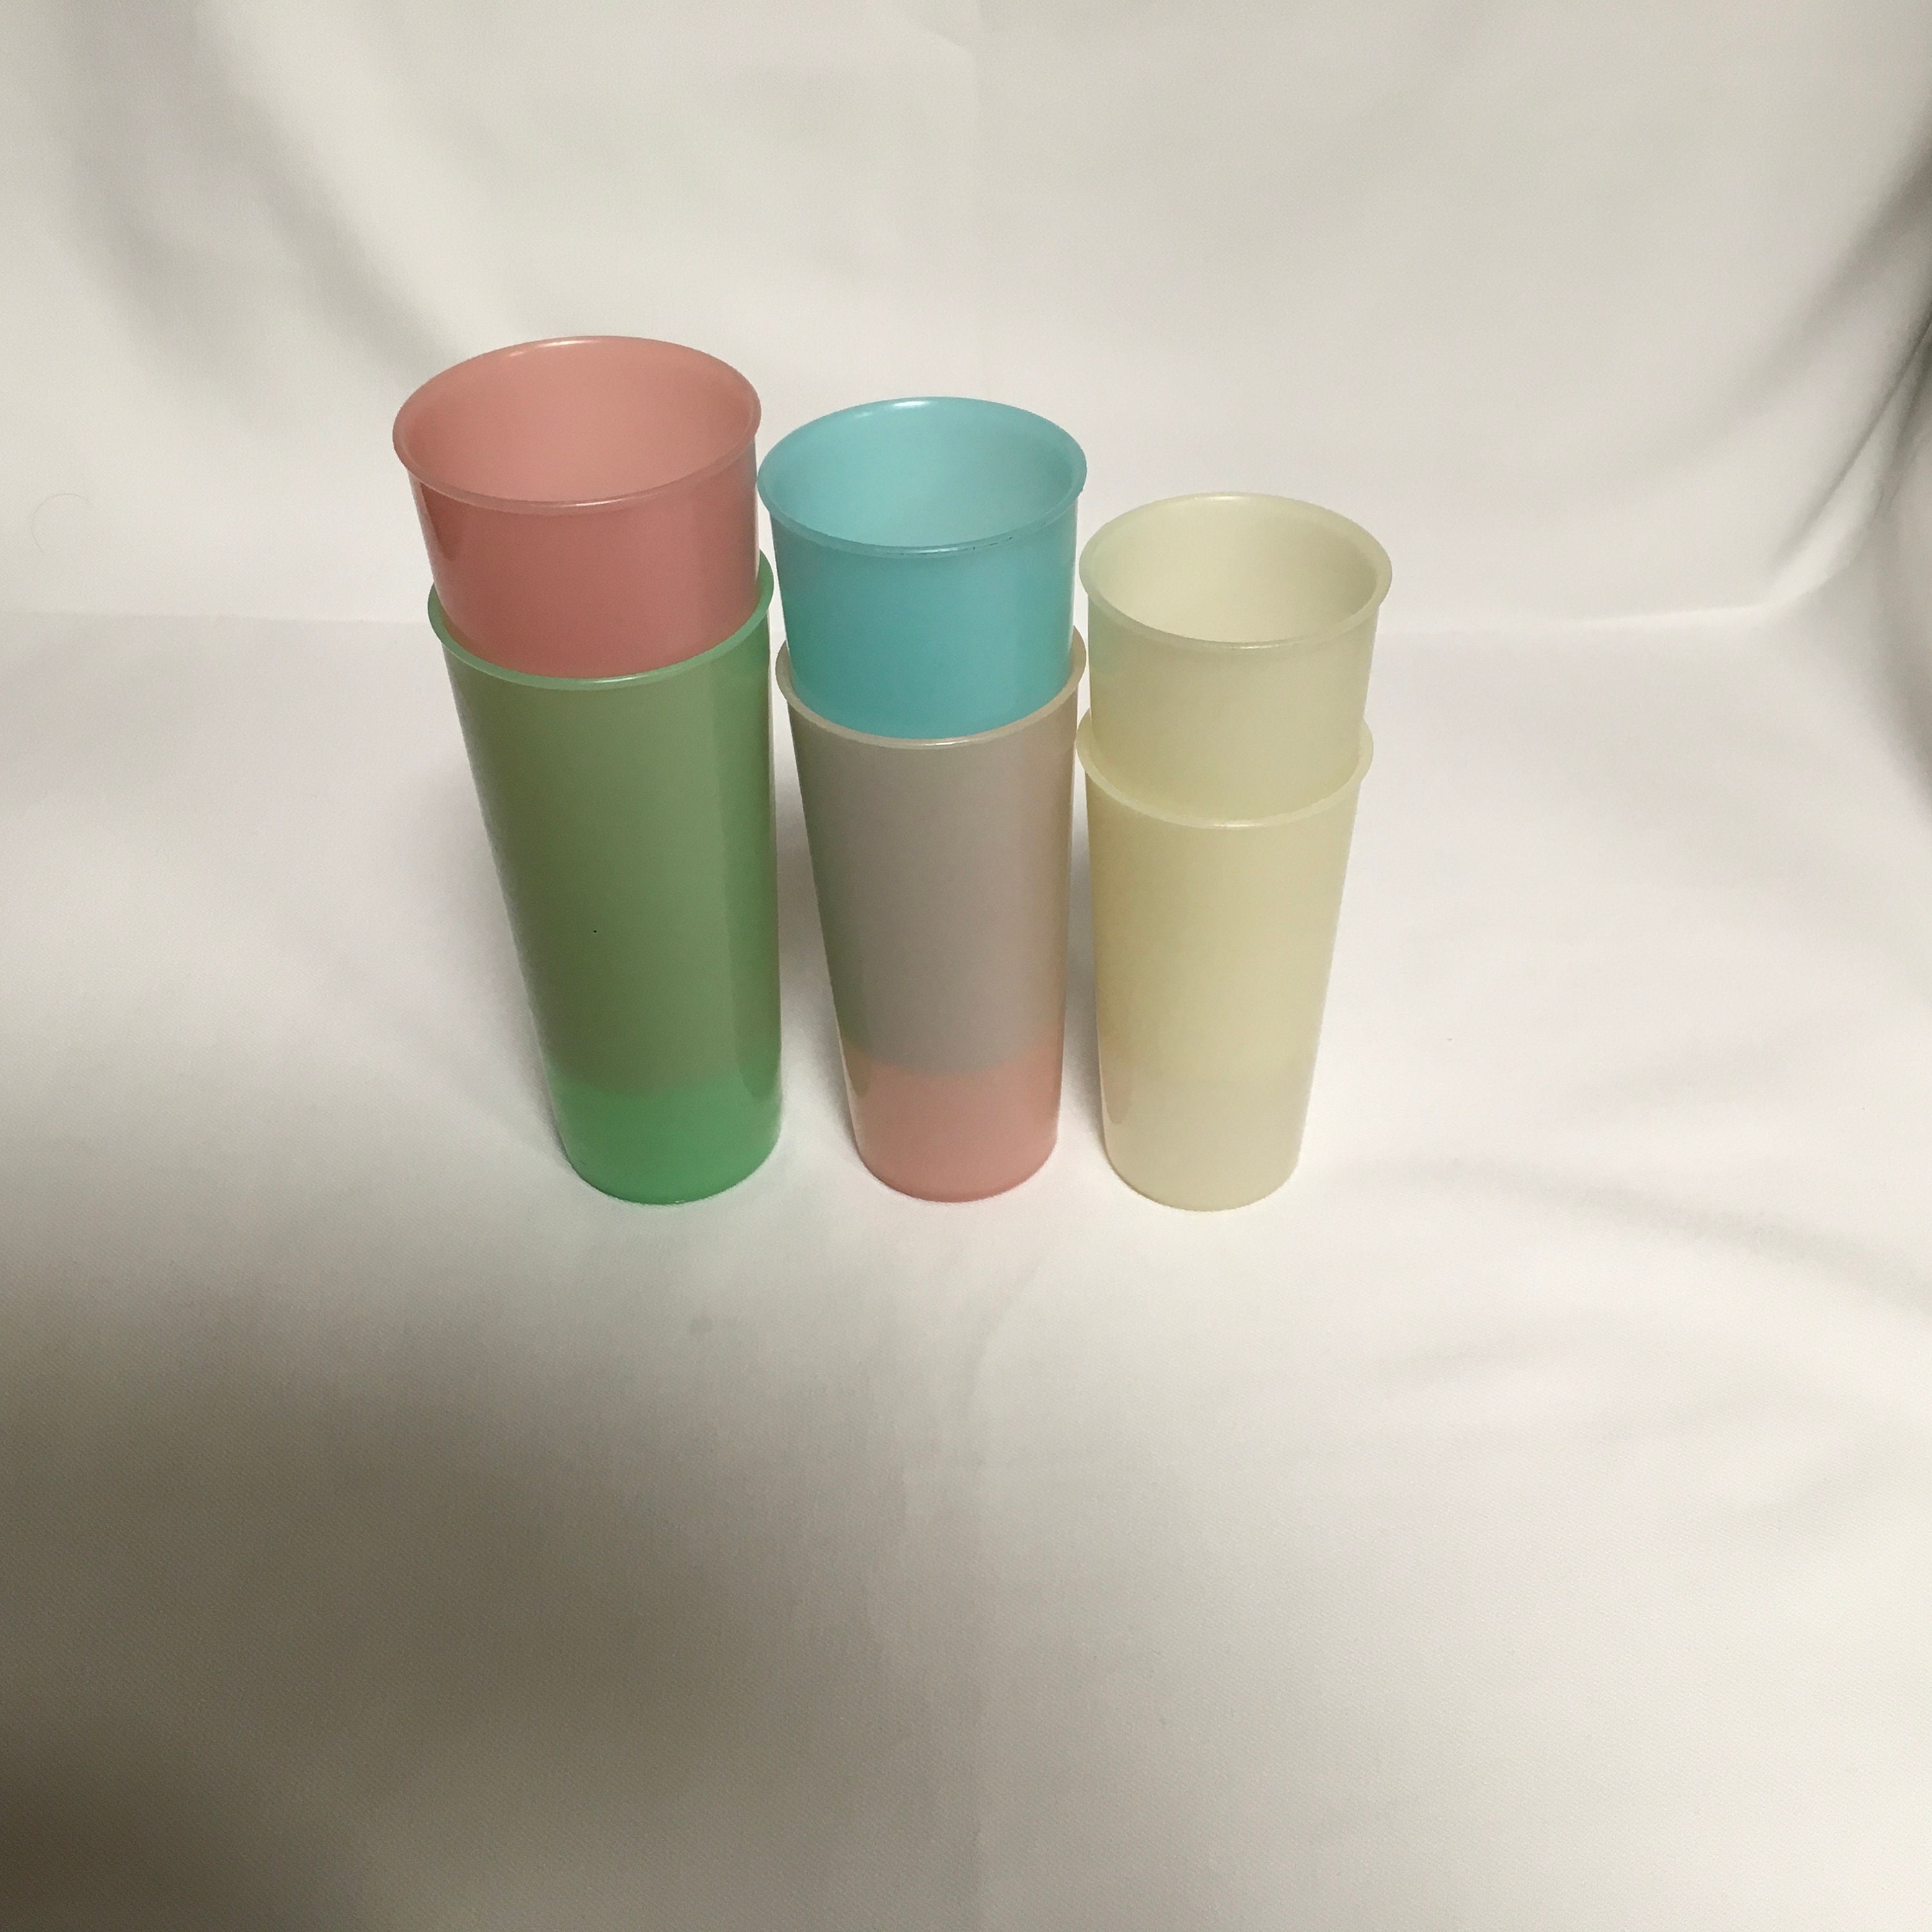 New Tupperware Vintage Get it All Tumbler Bouquet 9oz, 12oz and 16oz Set of  12 with Seals